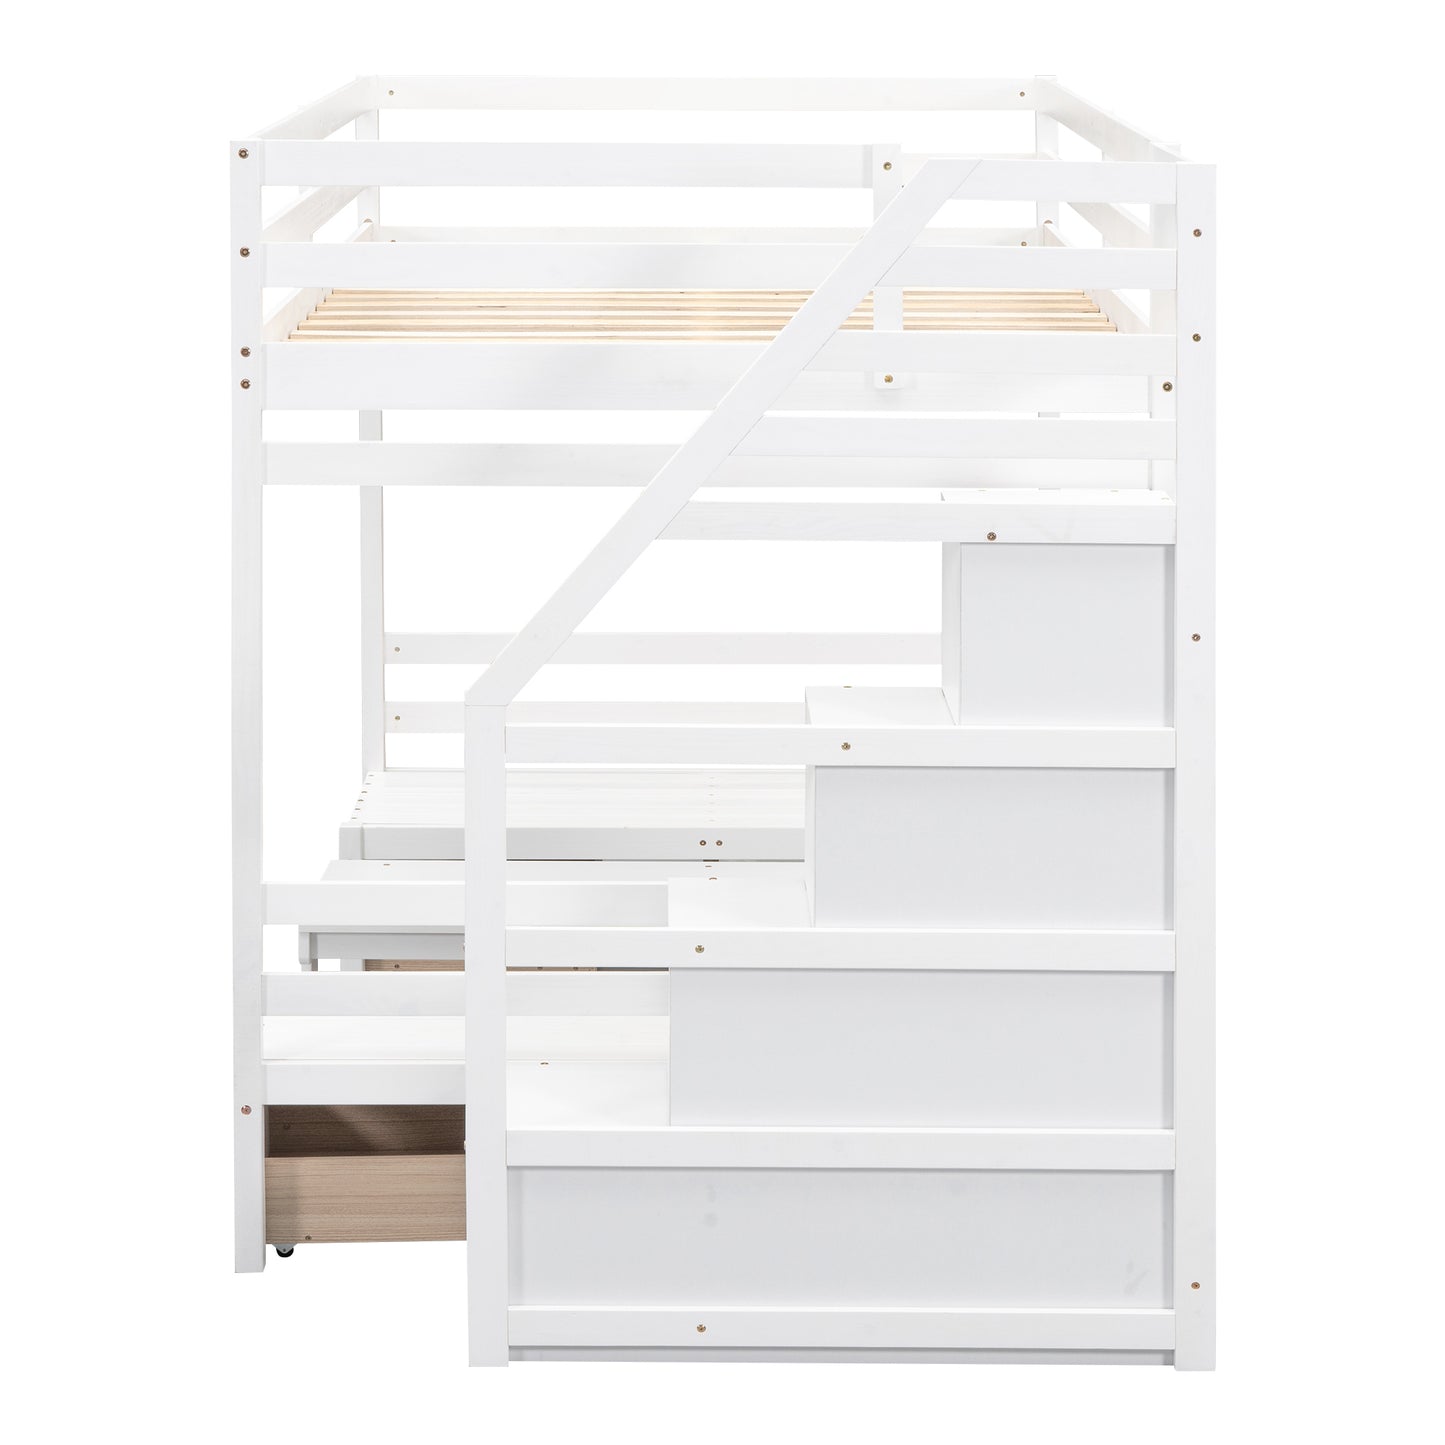 Full over Full Size Bunk with staircase,the Down Bed can be Convertible to Seats and Table Set,White